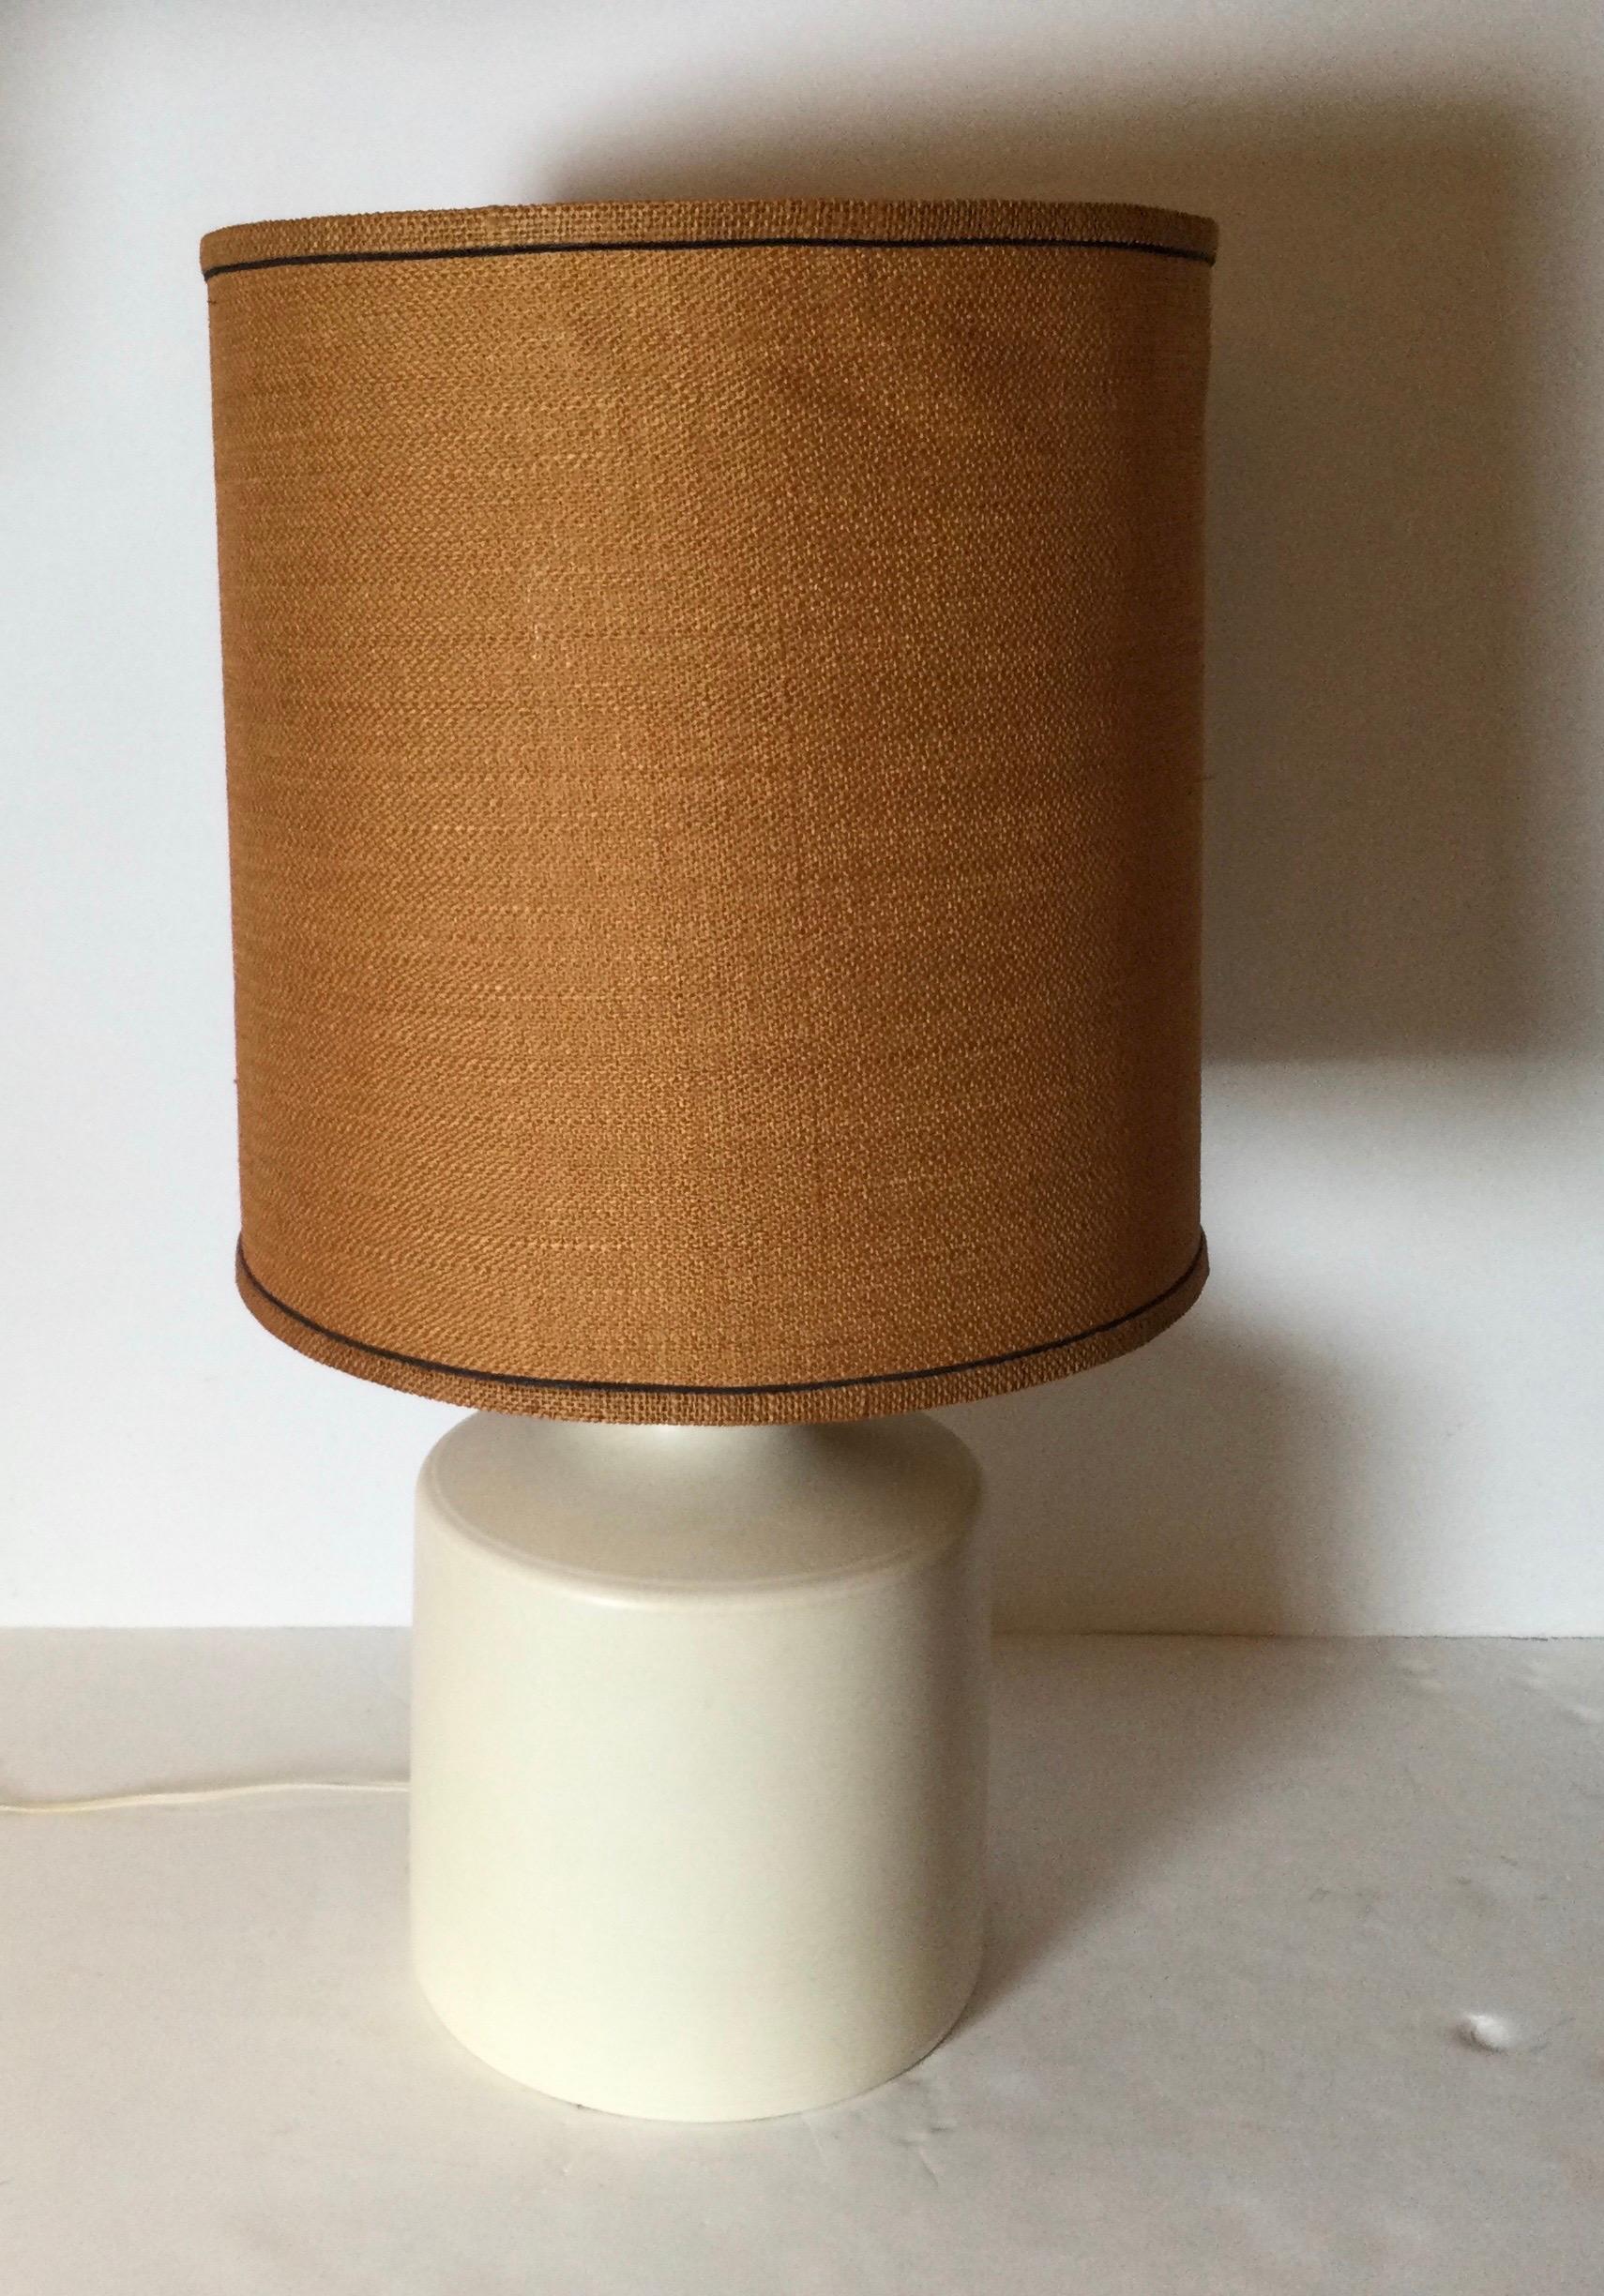 Midcentury very large statement Bostlund lamp in excellent original condition. Signed on base by cord.
Shade is for photography purpose only, it is not included.
Dimensions: 11